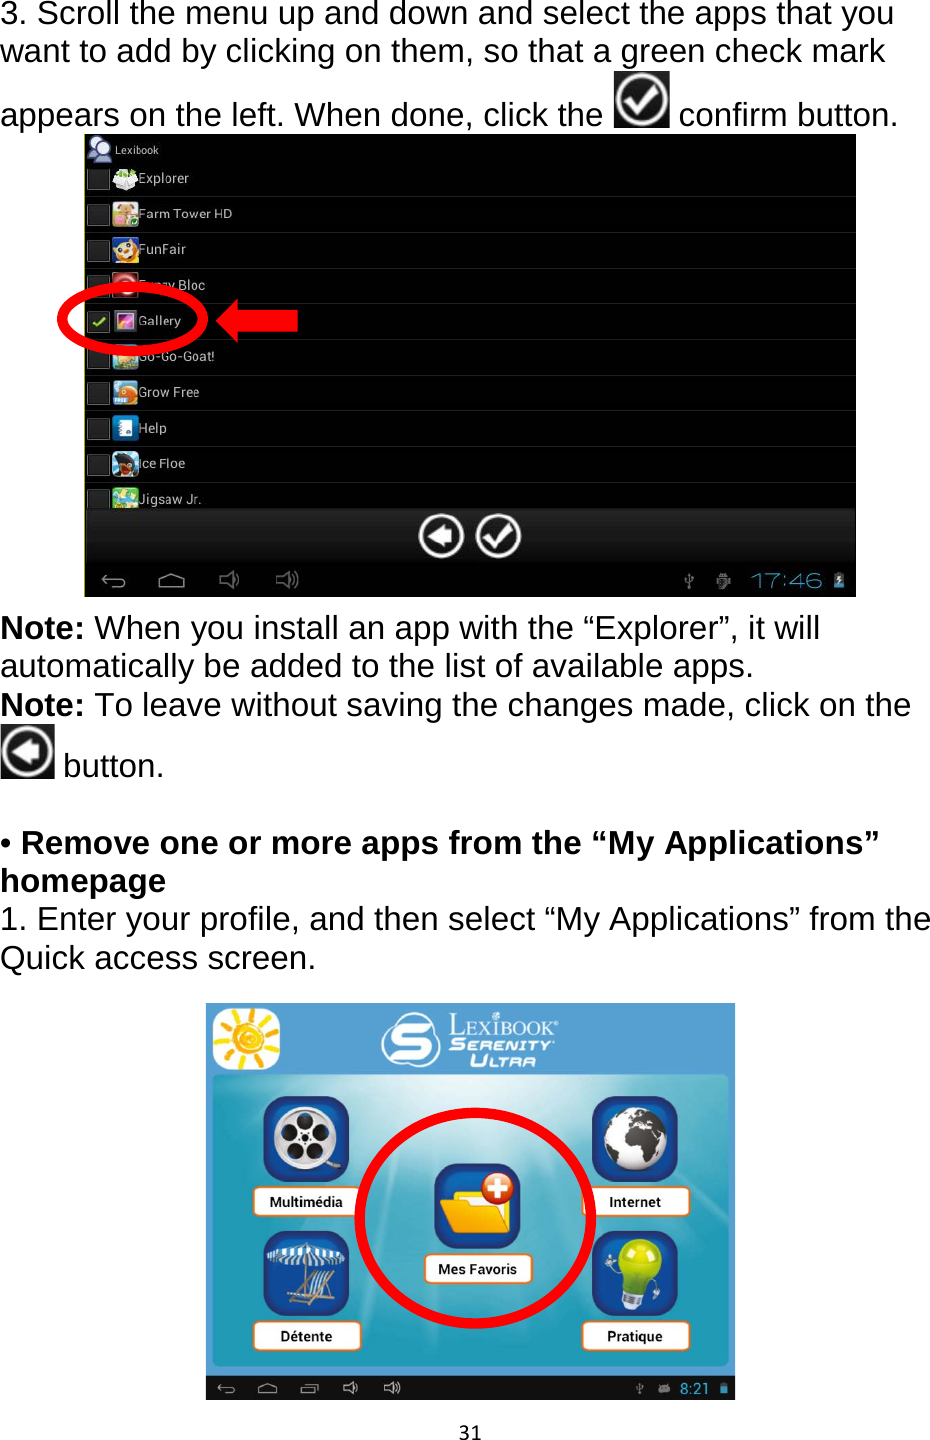 31  3. Scroll the menu up and down and select the apps that you want to add by clicking on them, so that a green check mark appears on the left. When done, click the   confirm button.  Note: When you install an app with the “Explorer”, it will automatically be added to the list of available apps. Note: To leave without saving the changes made, click on the  button.   • Remove one or more apps from the “My Applications” homepage 1. Enter your profile, and then select “My Applications” from the Quick access screen.    